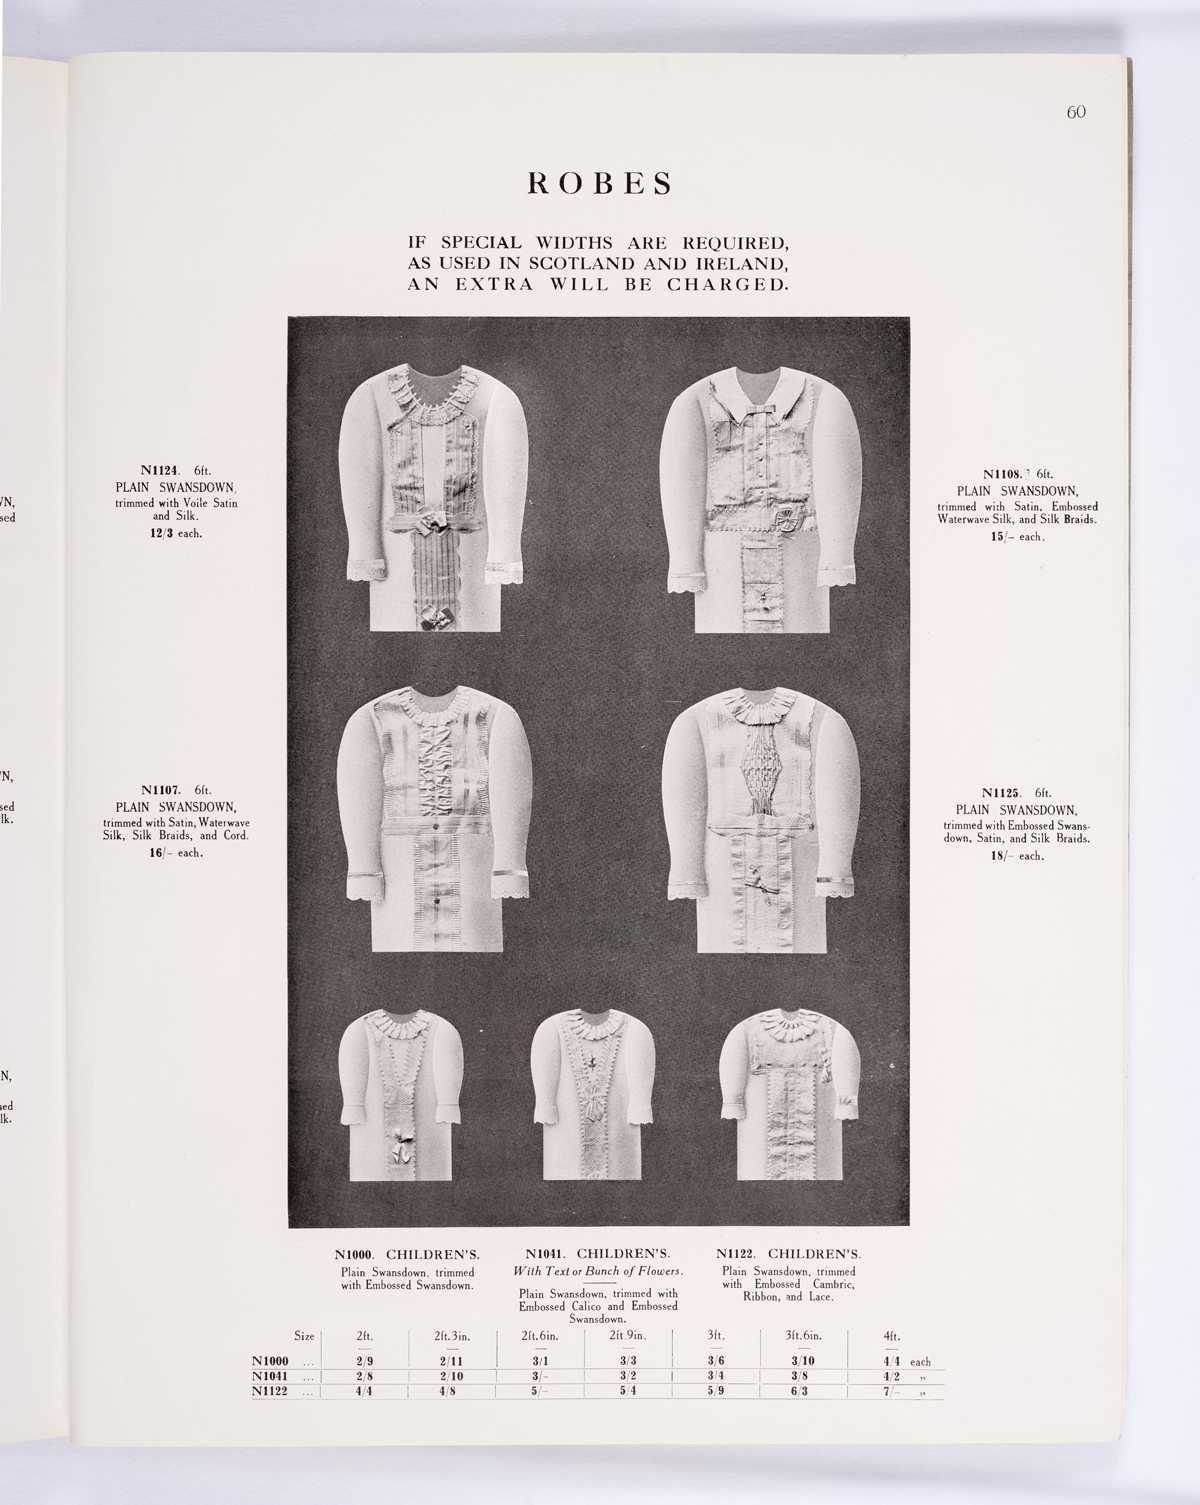 Catalogue page with 7 shroud designs